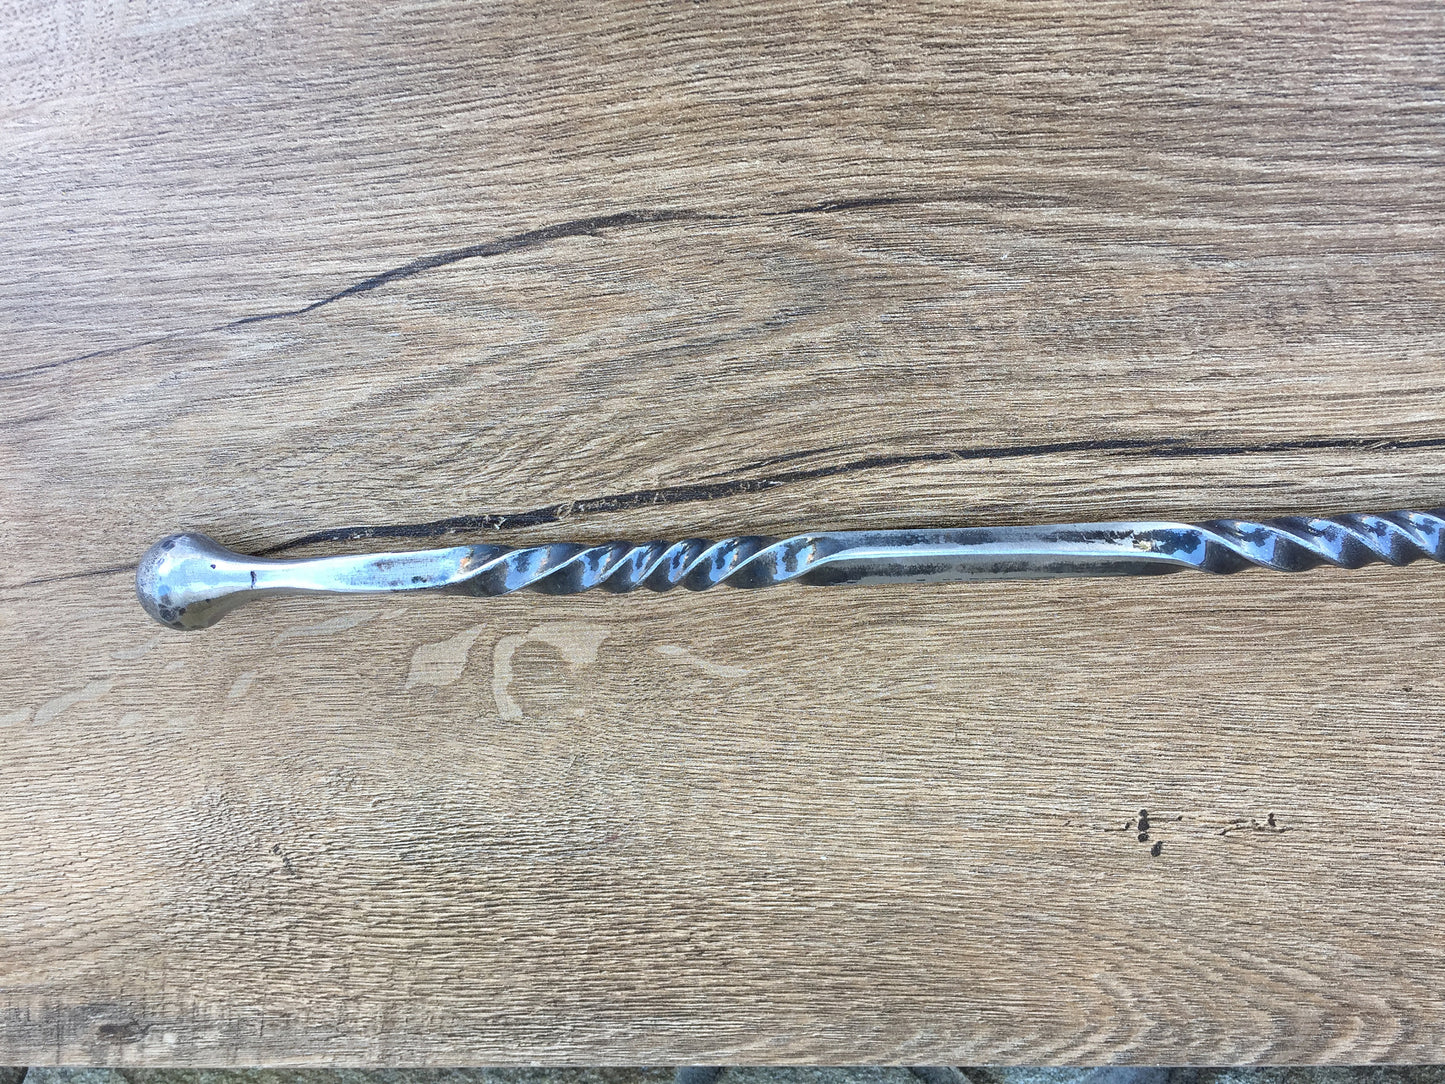 Shoe horn, hand forged shoehorn, anniversary gift, iron gifts, wrought iron shoe horn, shoe accessories, shoe stuff, insoles, metal art